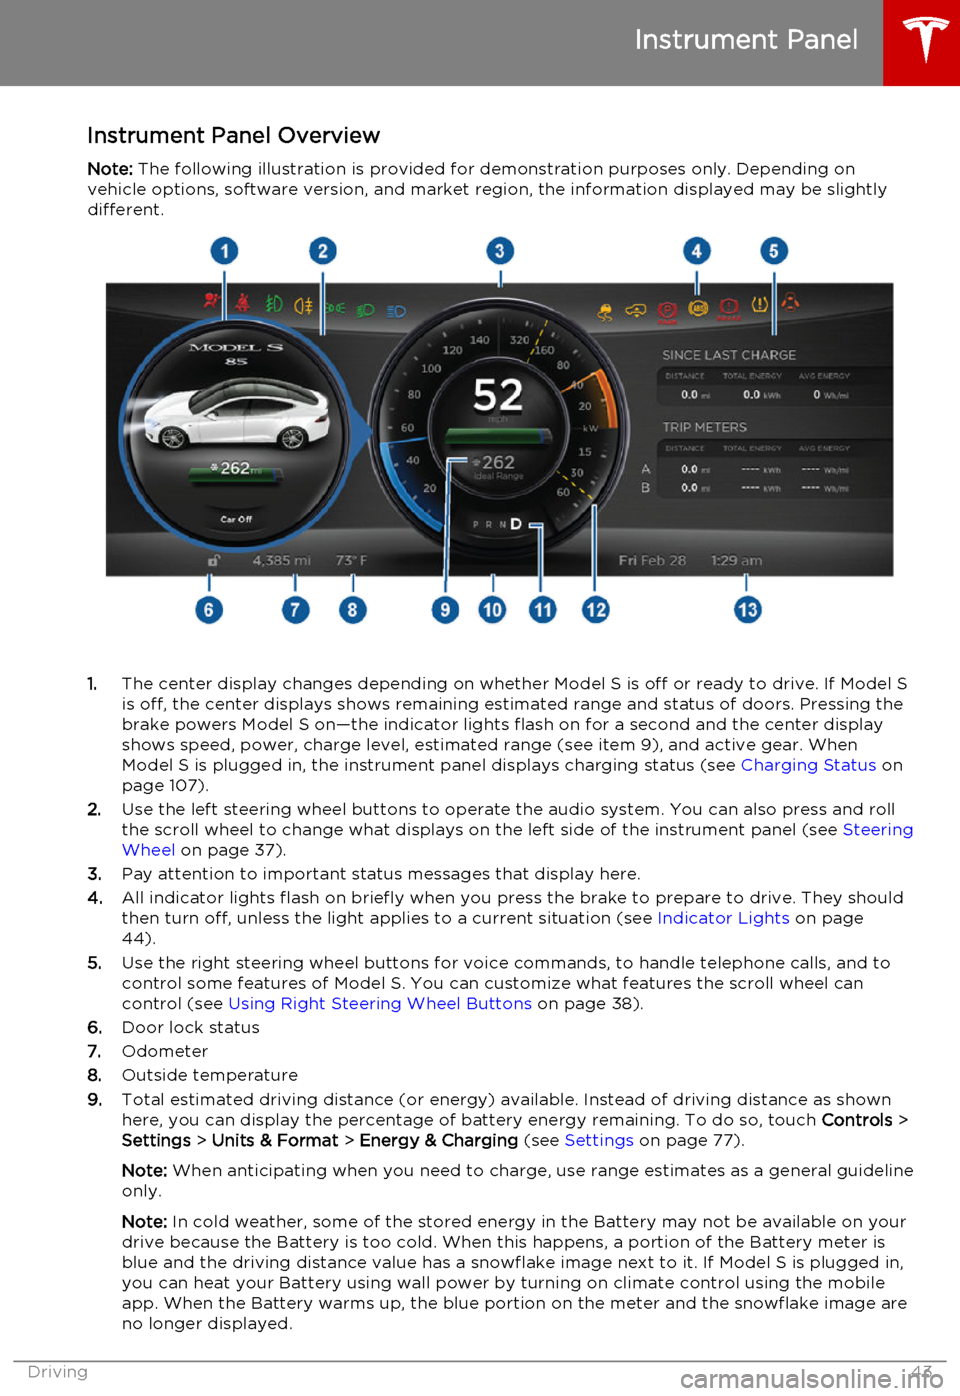 TESLA MODEL S 2015  Owners Manual Instrument Panel OverviewNote:  The following illustration is provided for demonstration purposes only. Depending on
vehicle options, software version, and market region, the information displayed may